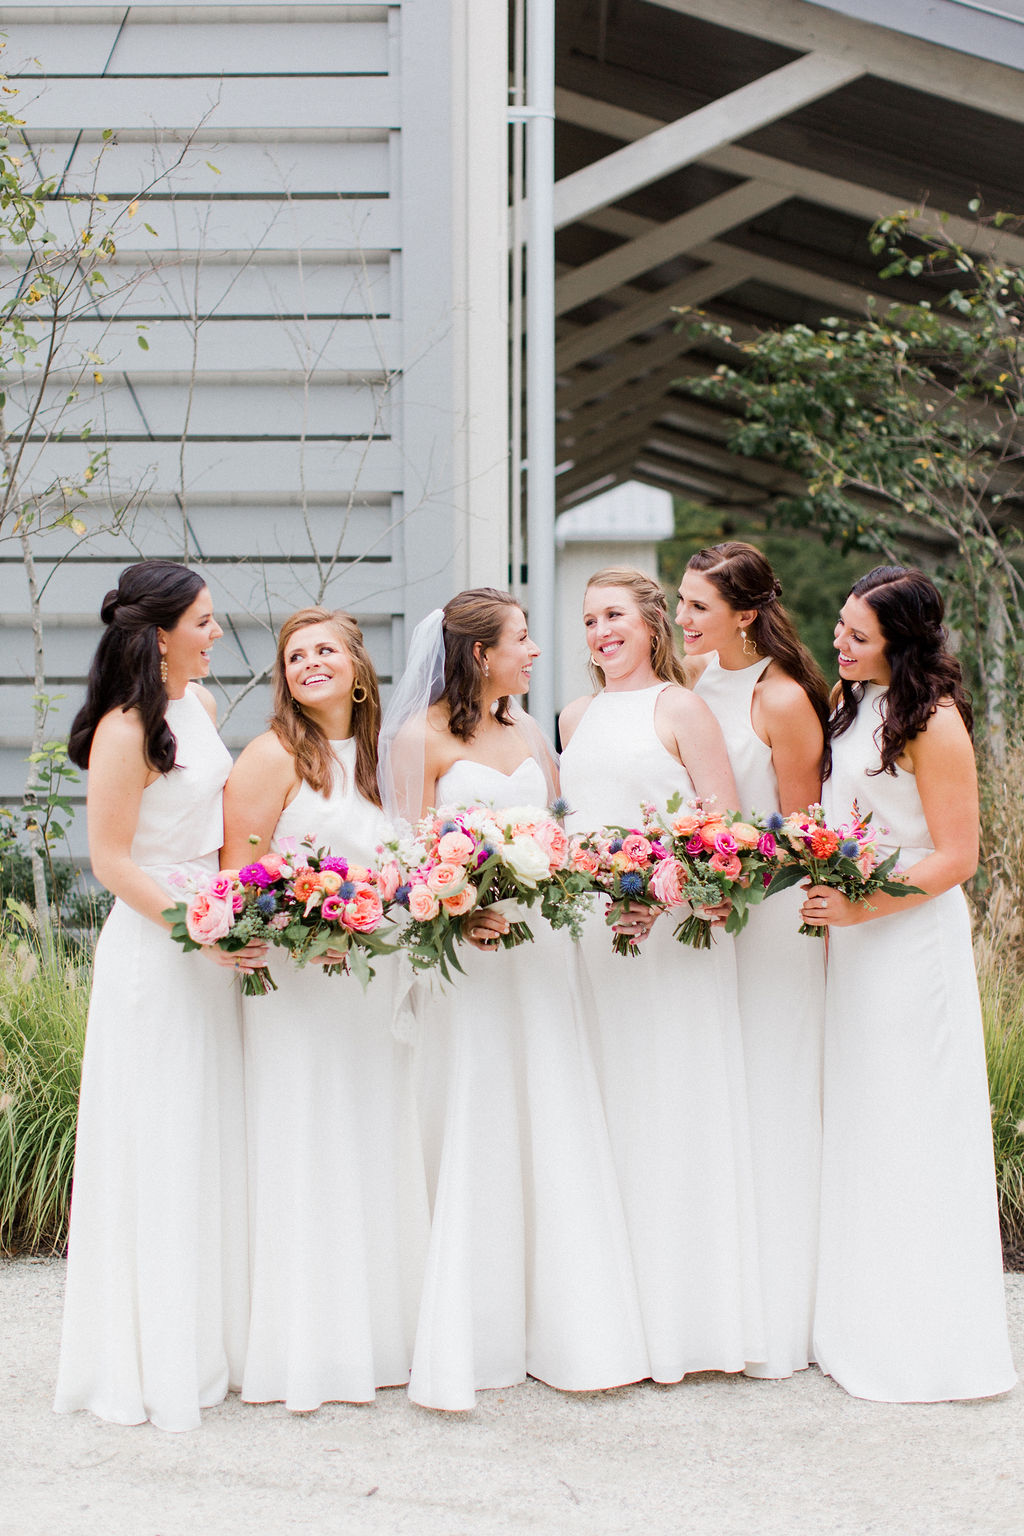 Bridal 30 of The Best Bridesmaid Gifts That Your Bridal Party Will Love